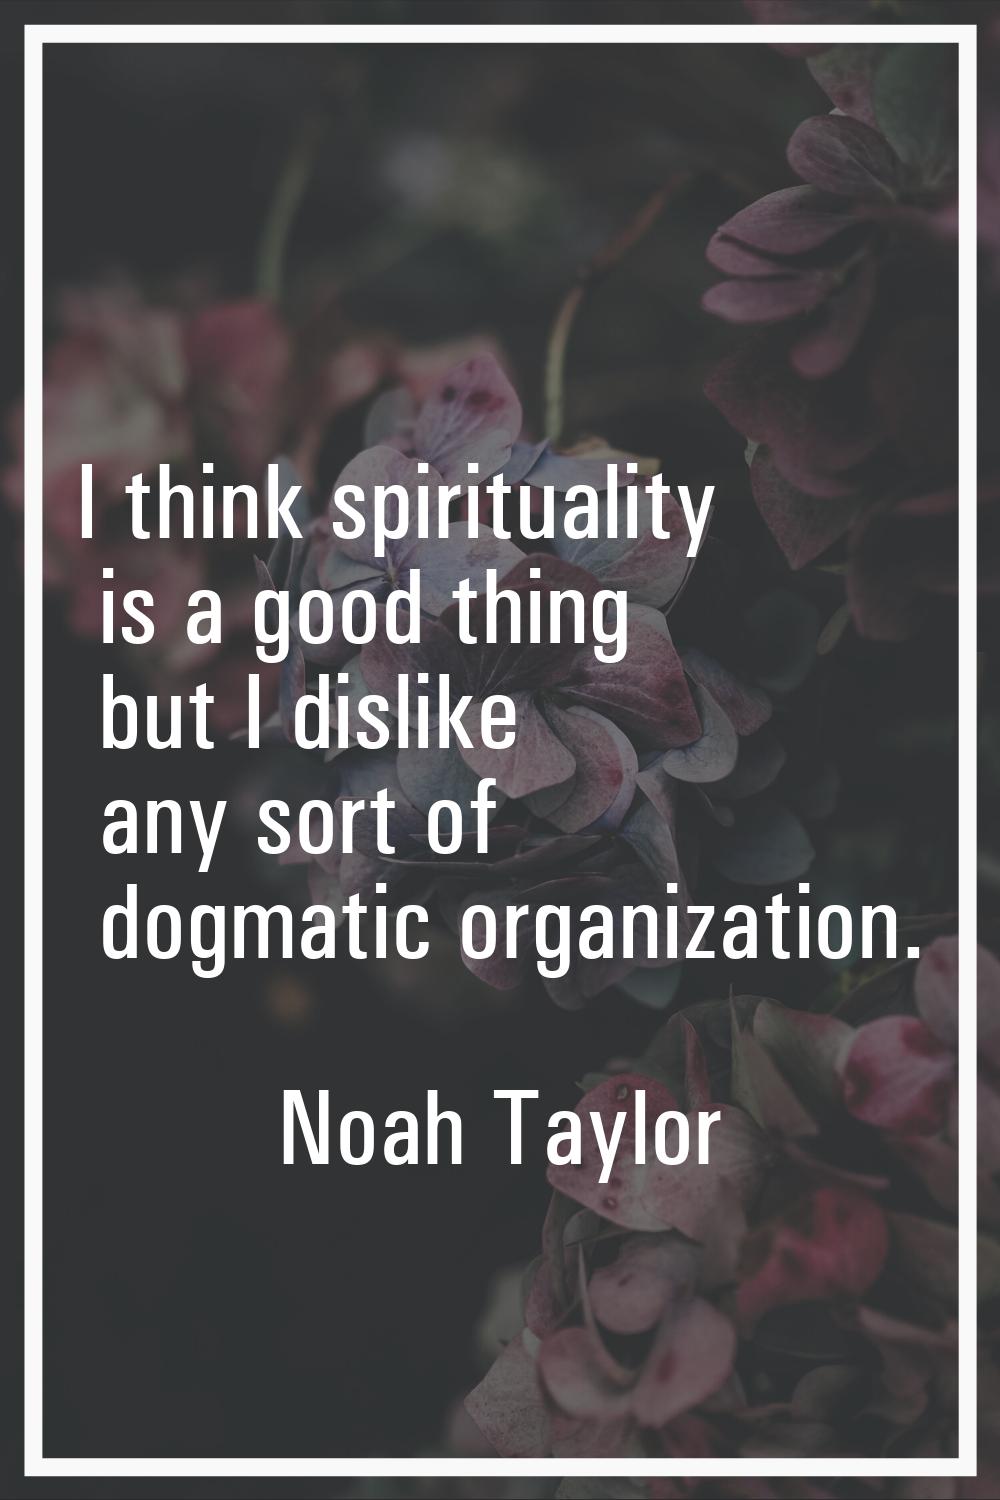 I think spirituality is a good thing but I dislike any sort of dogmatic organization.